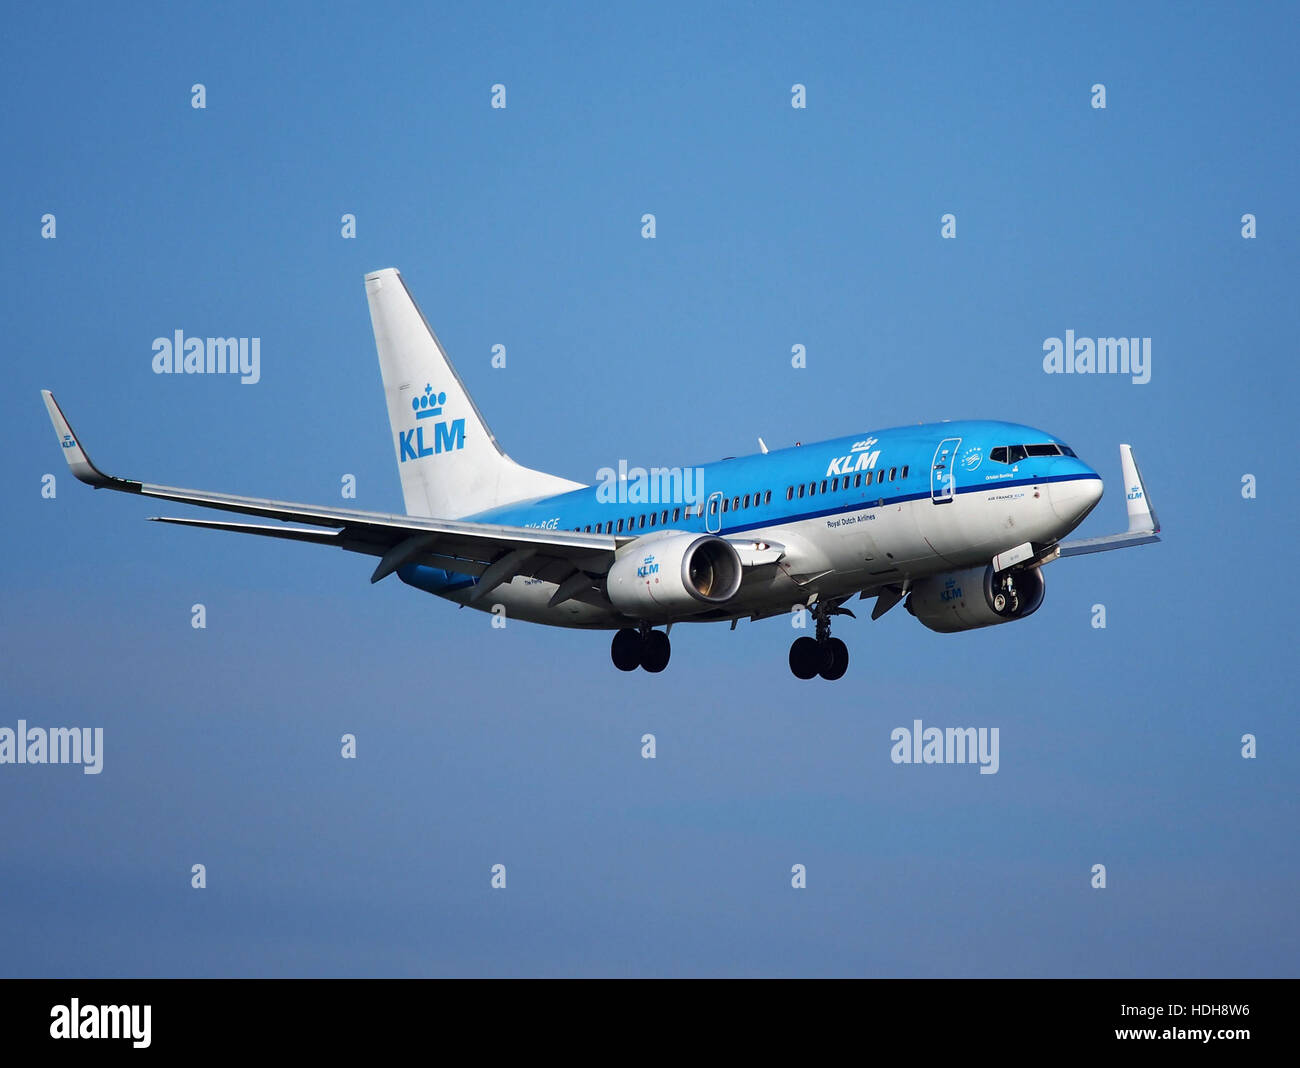 Avion avion flying sky fly wings cruising Banque D'Images